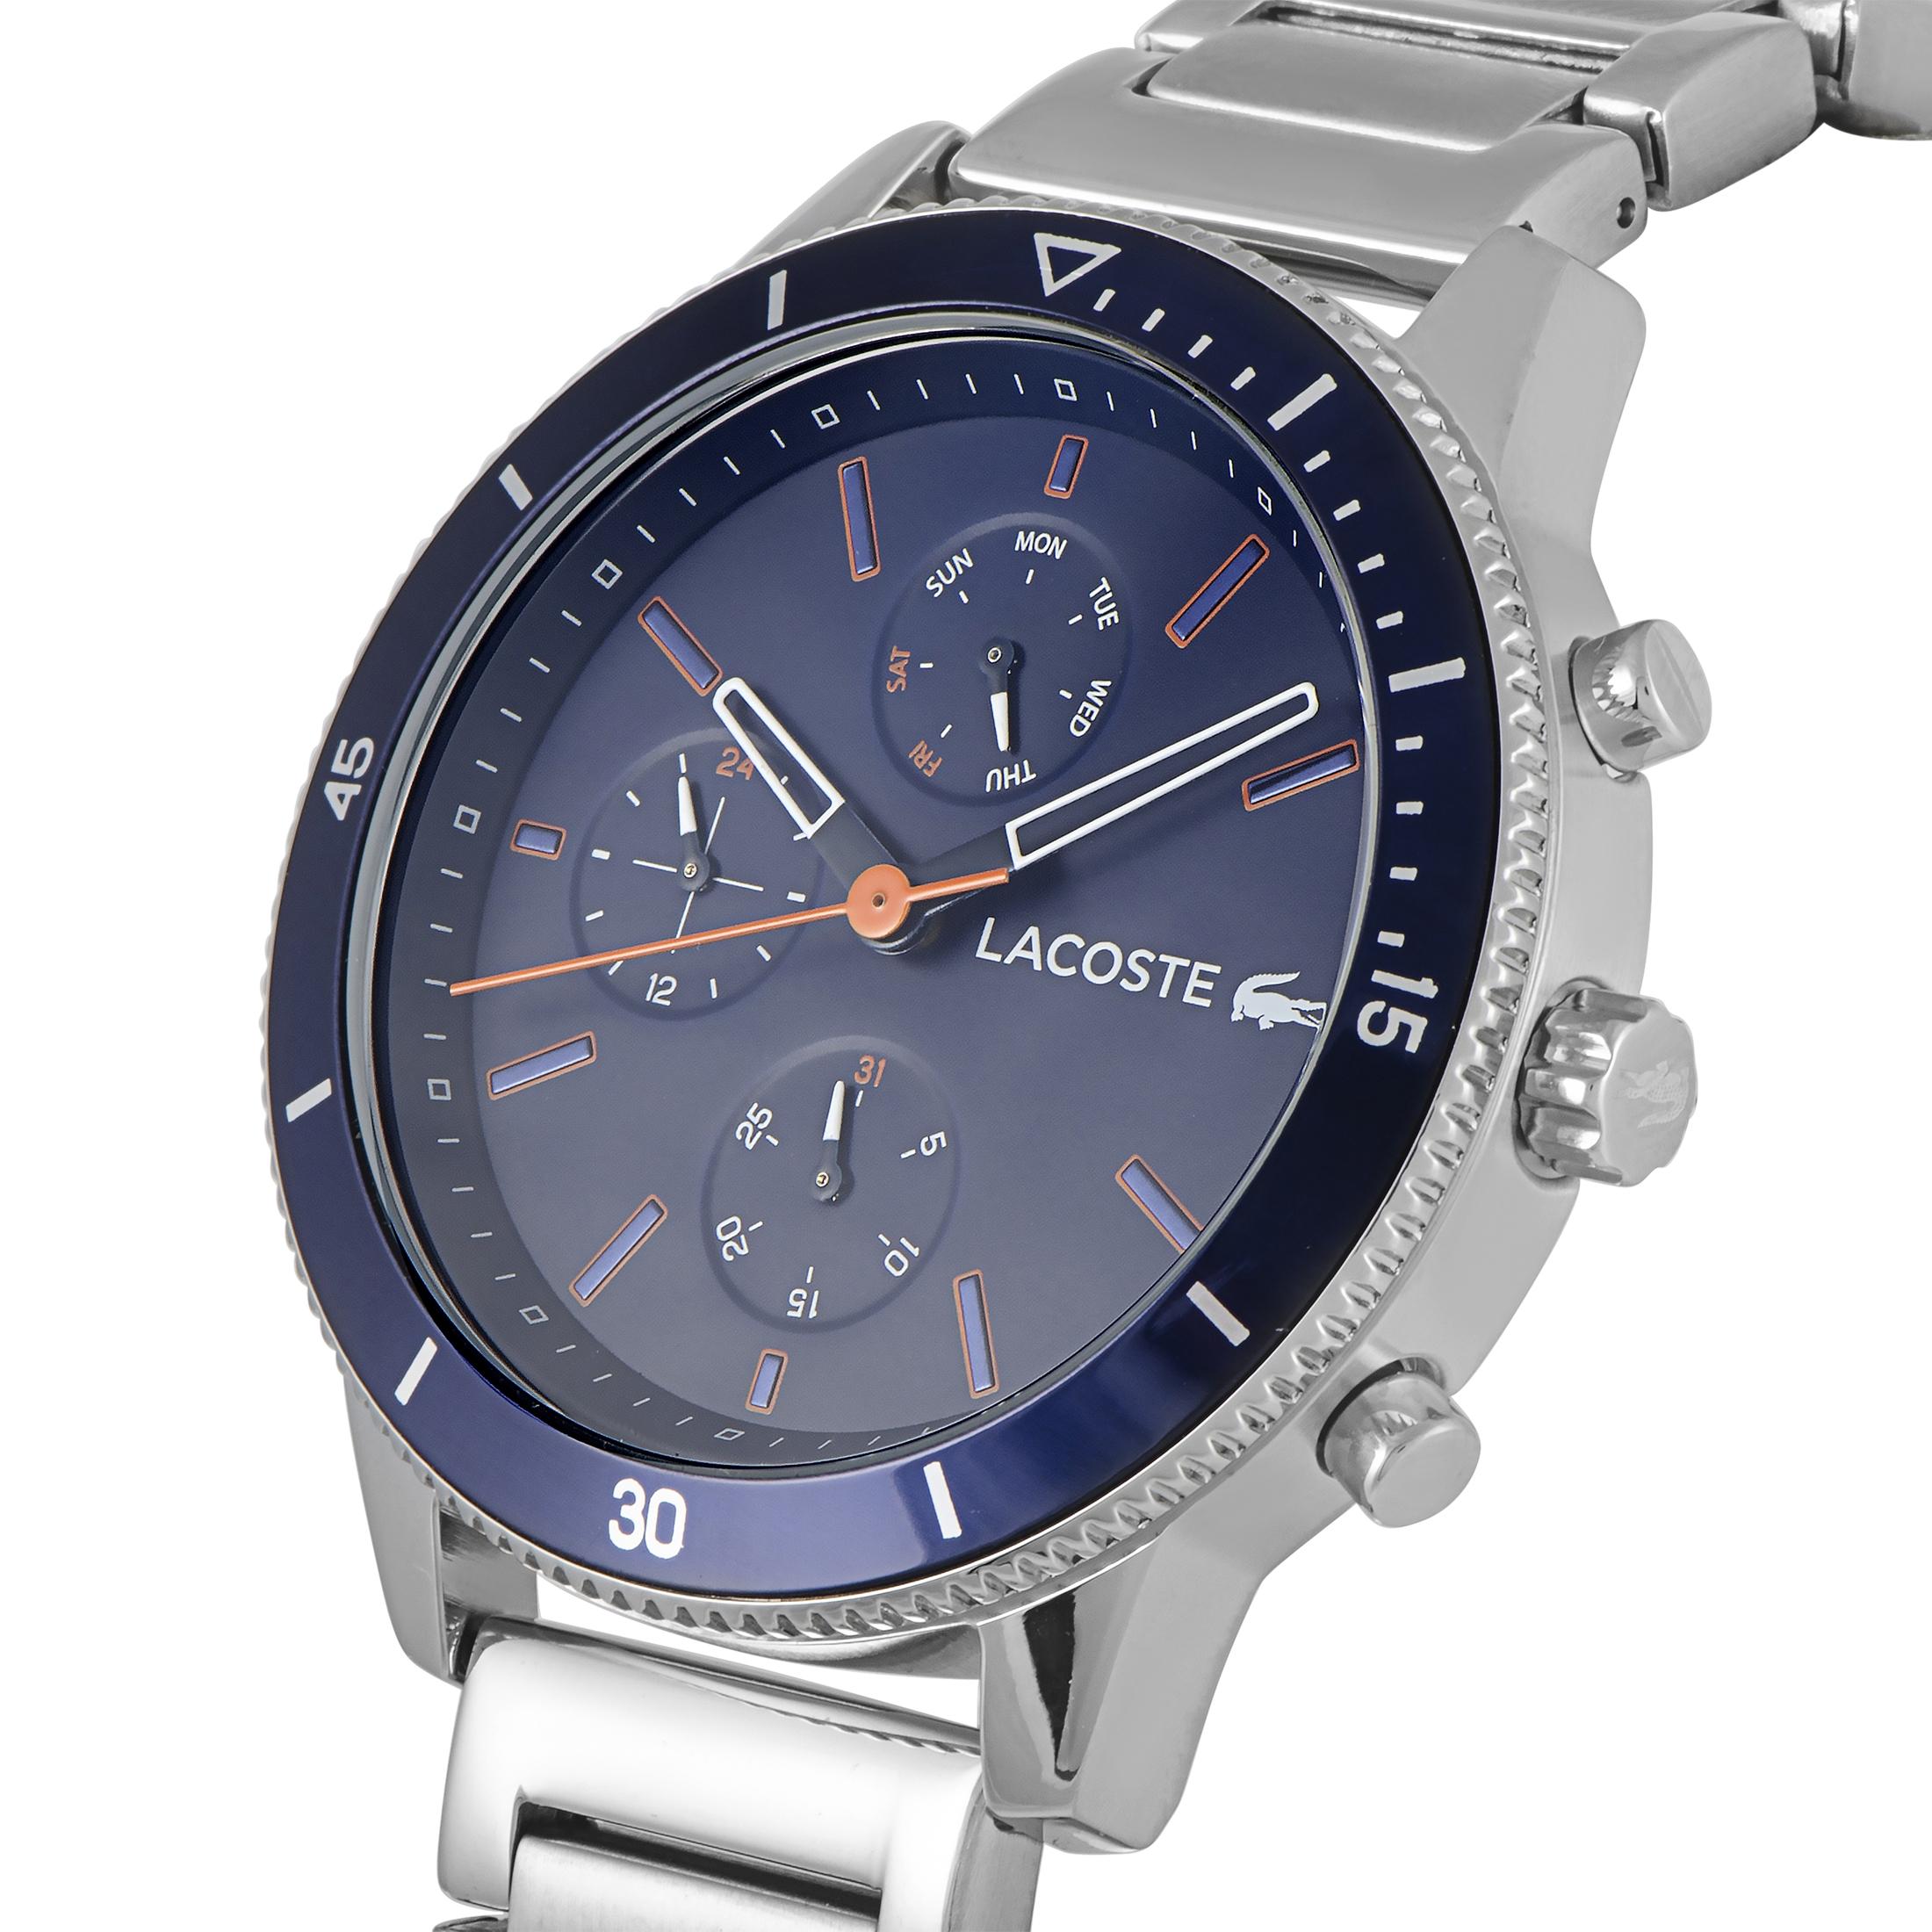 This is the Lacoste Key West watch, reference number 2010995.
 
 It boasts a 44 mm stainless steel case that is presented on a stainless steel bracelet. The case is water-resistant to 50 meters. The blue dial features central hours, minutes and